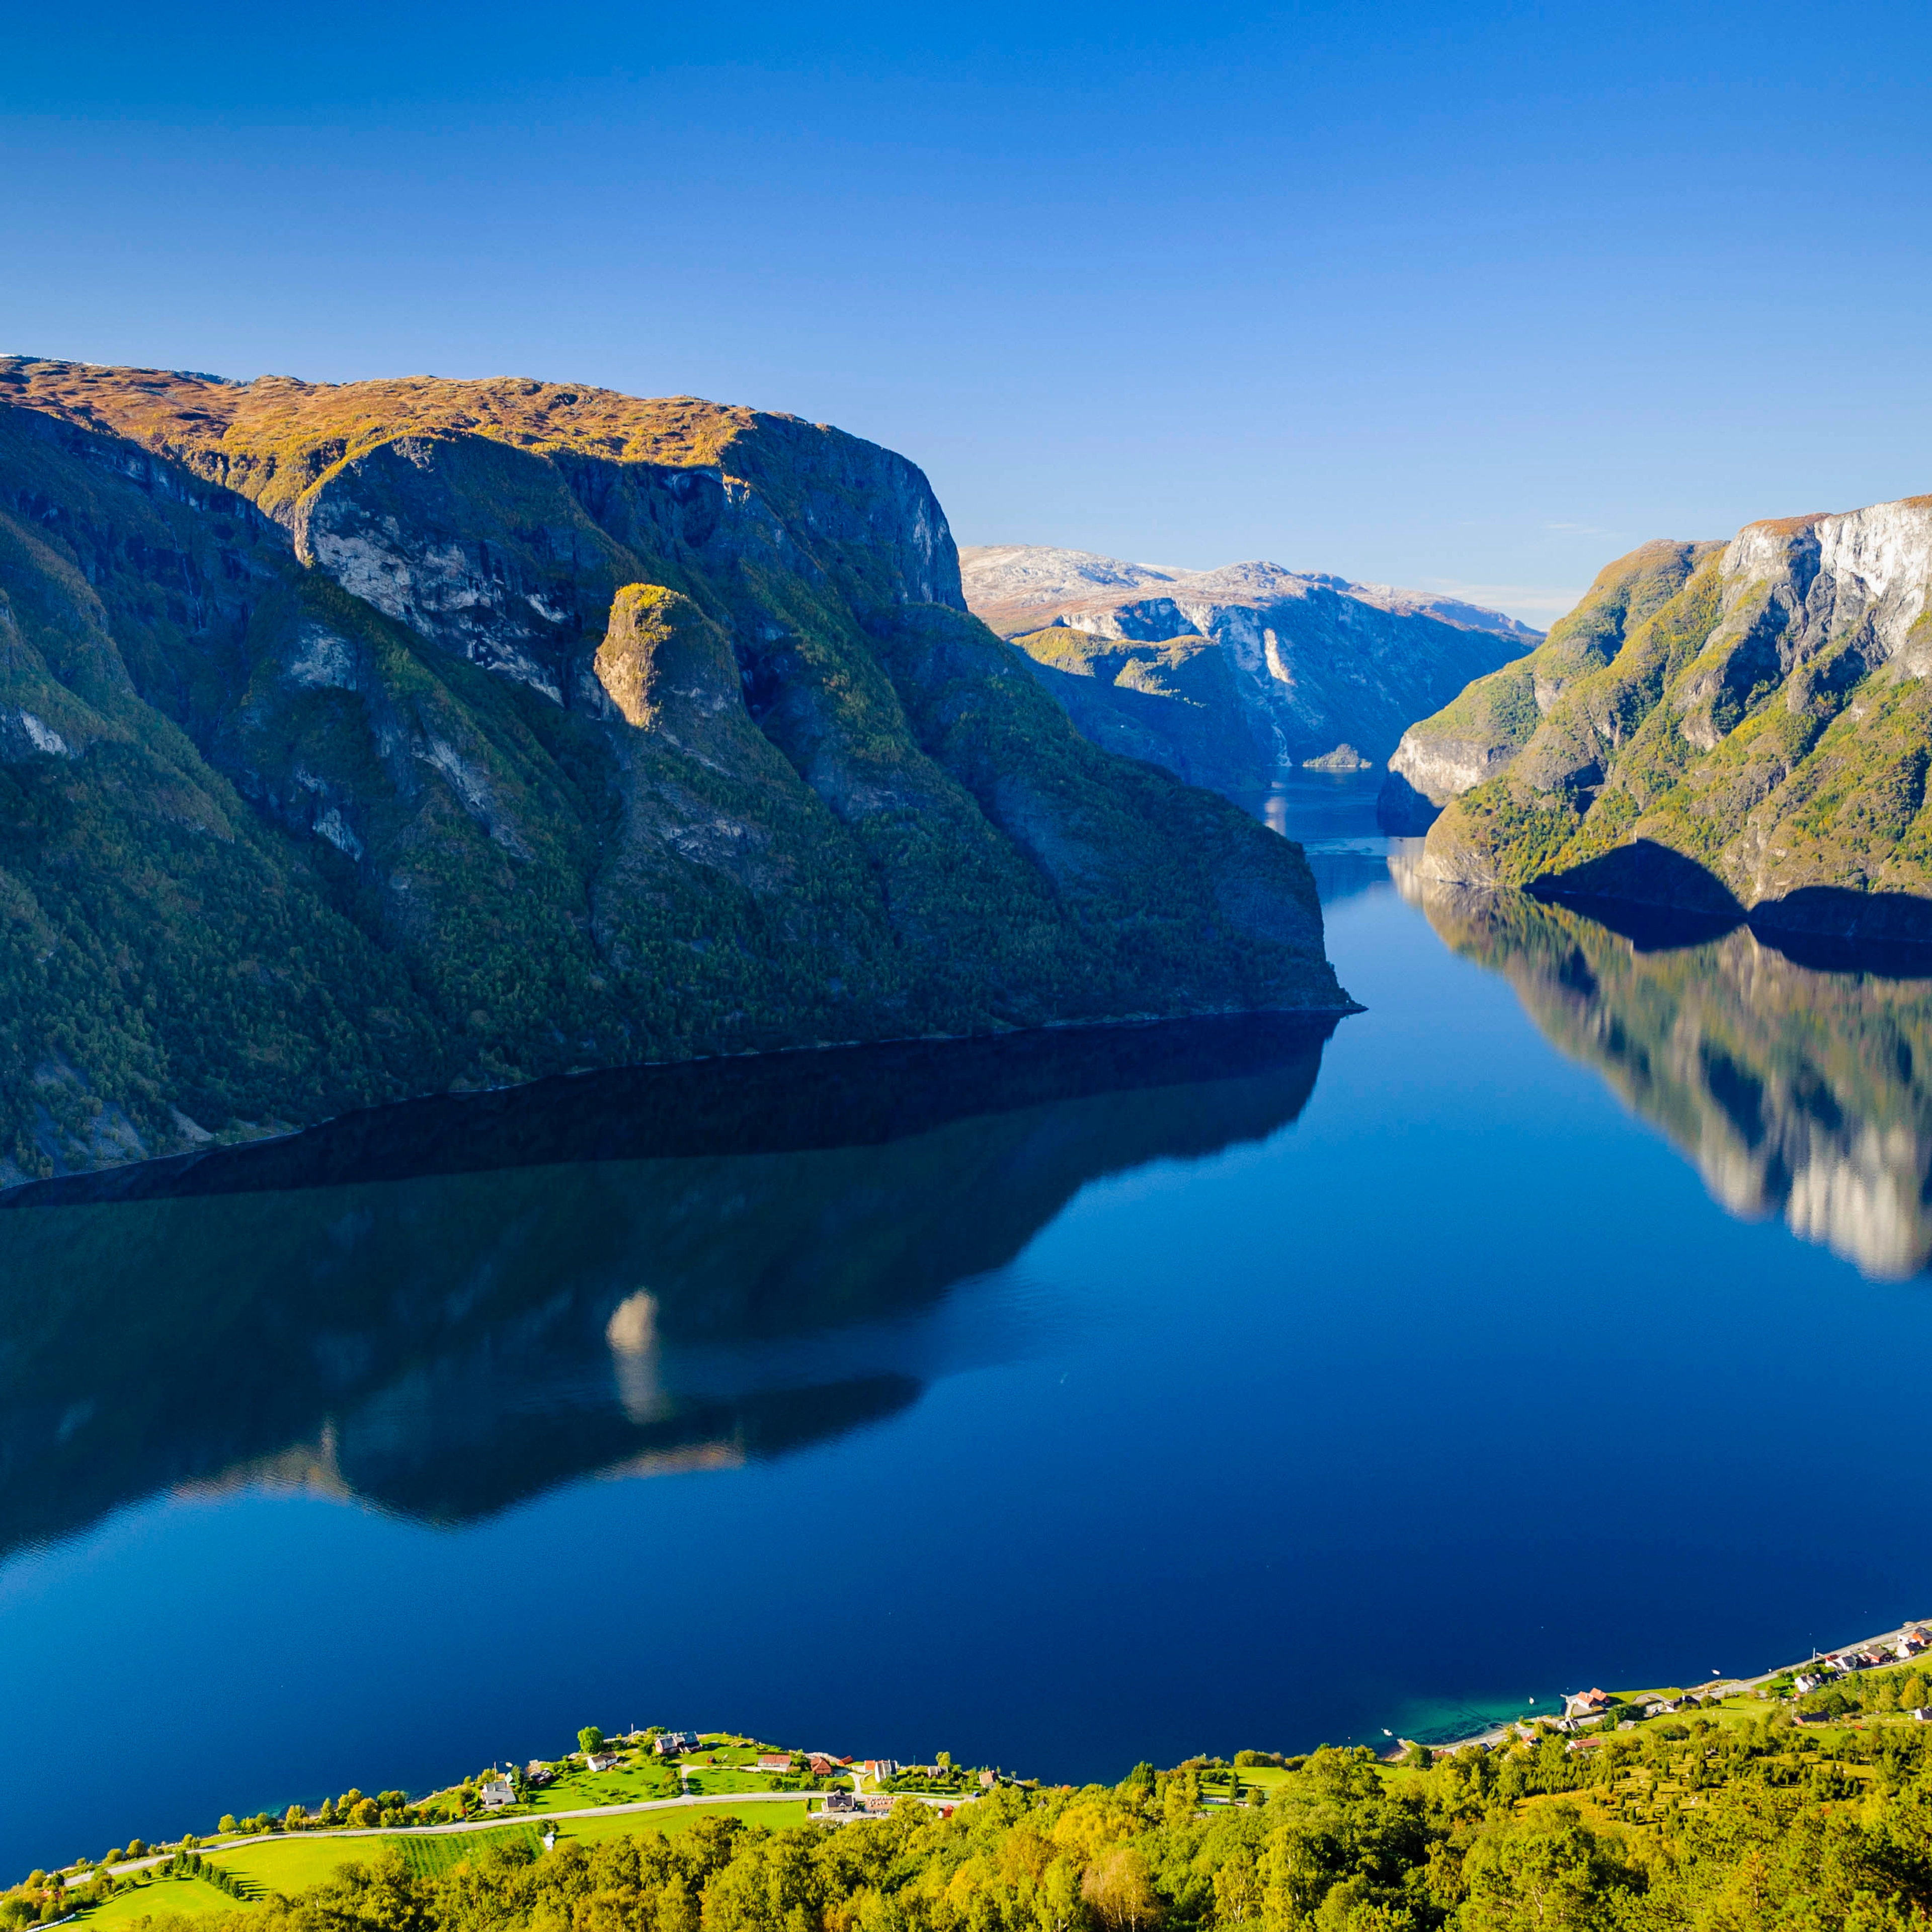 A beautiful day by the Aurlandsfjord - Aurland, Norway